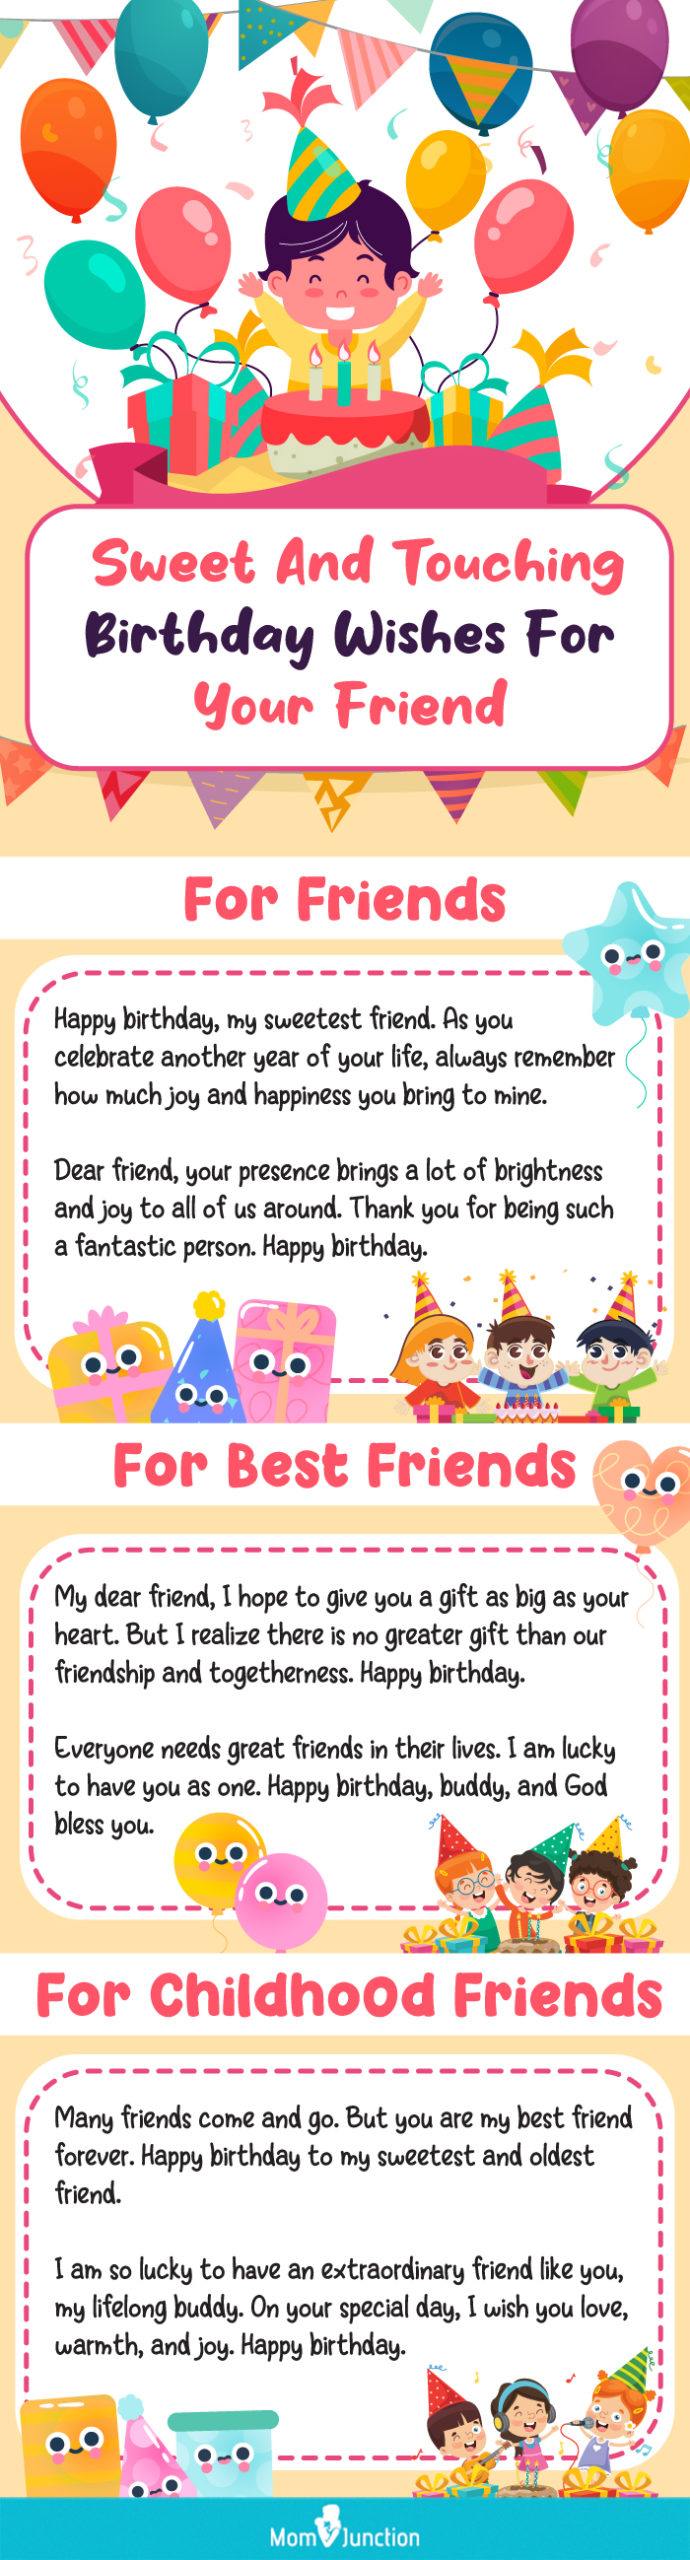 happy birthday card for best friend forever